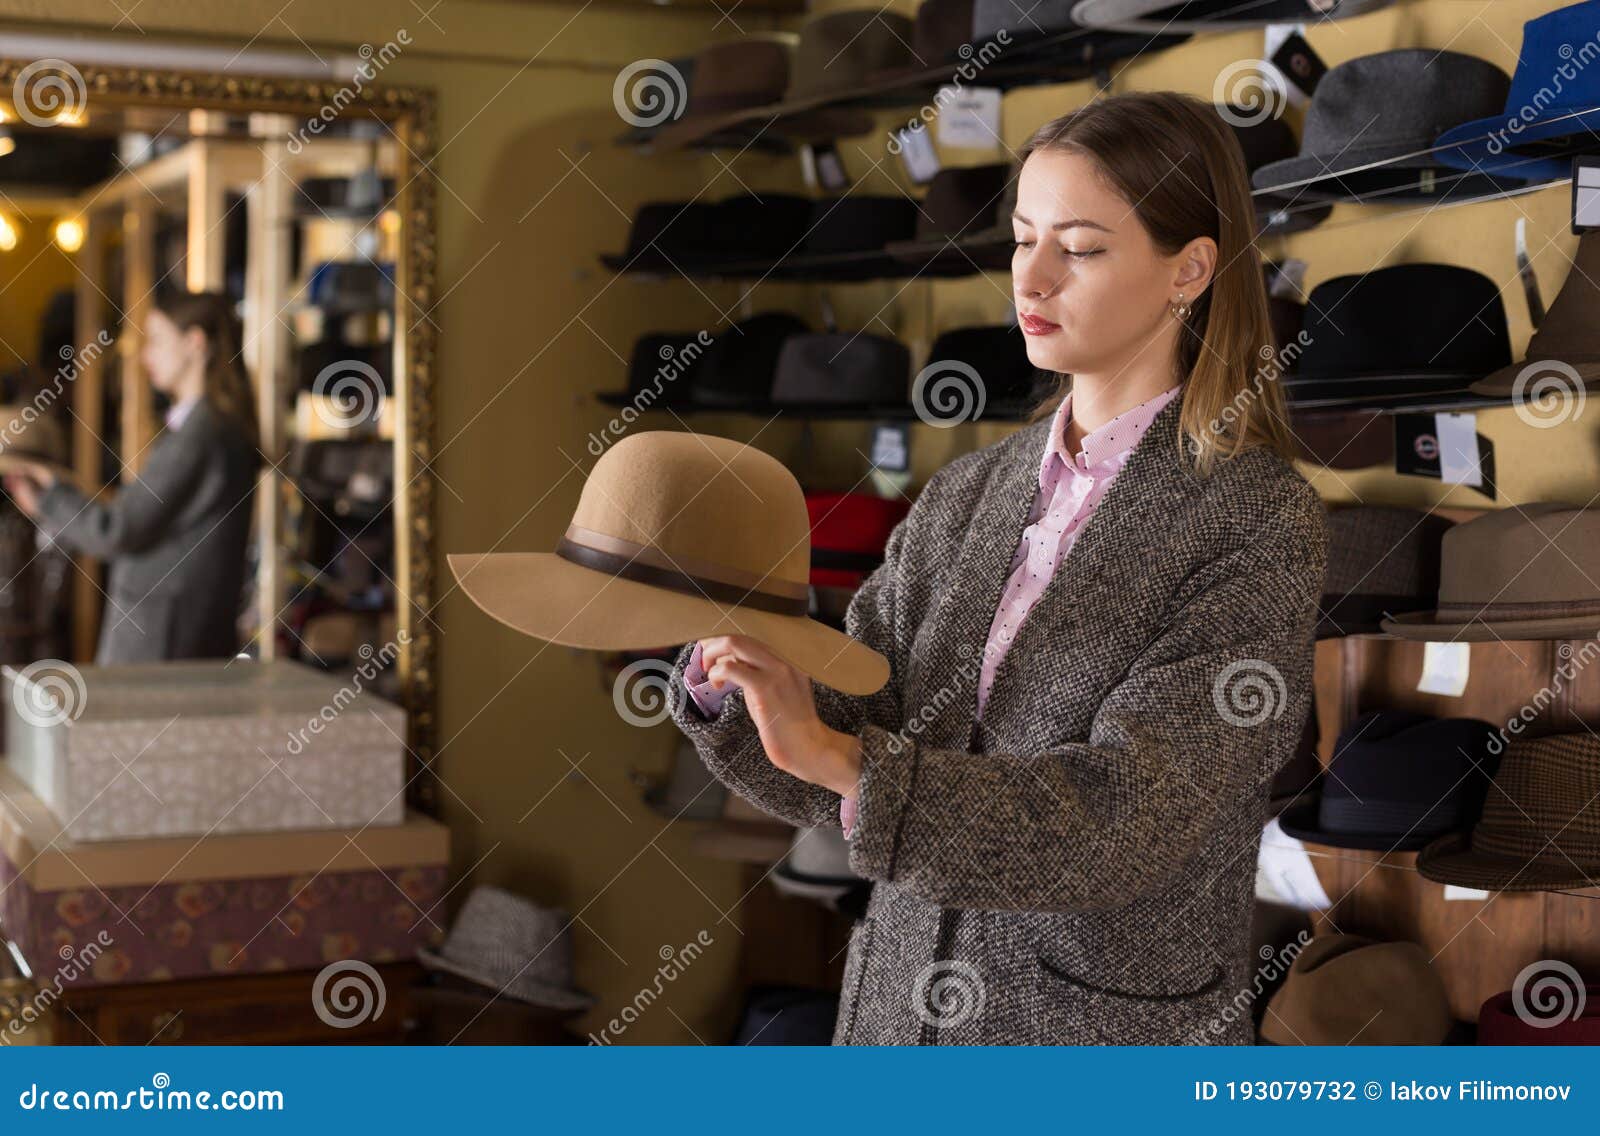 Woman Choosing Hat in Store Stock Photo - Image of consumer, interior ...